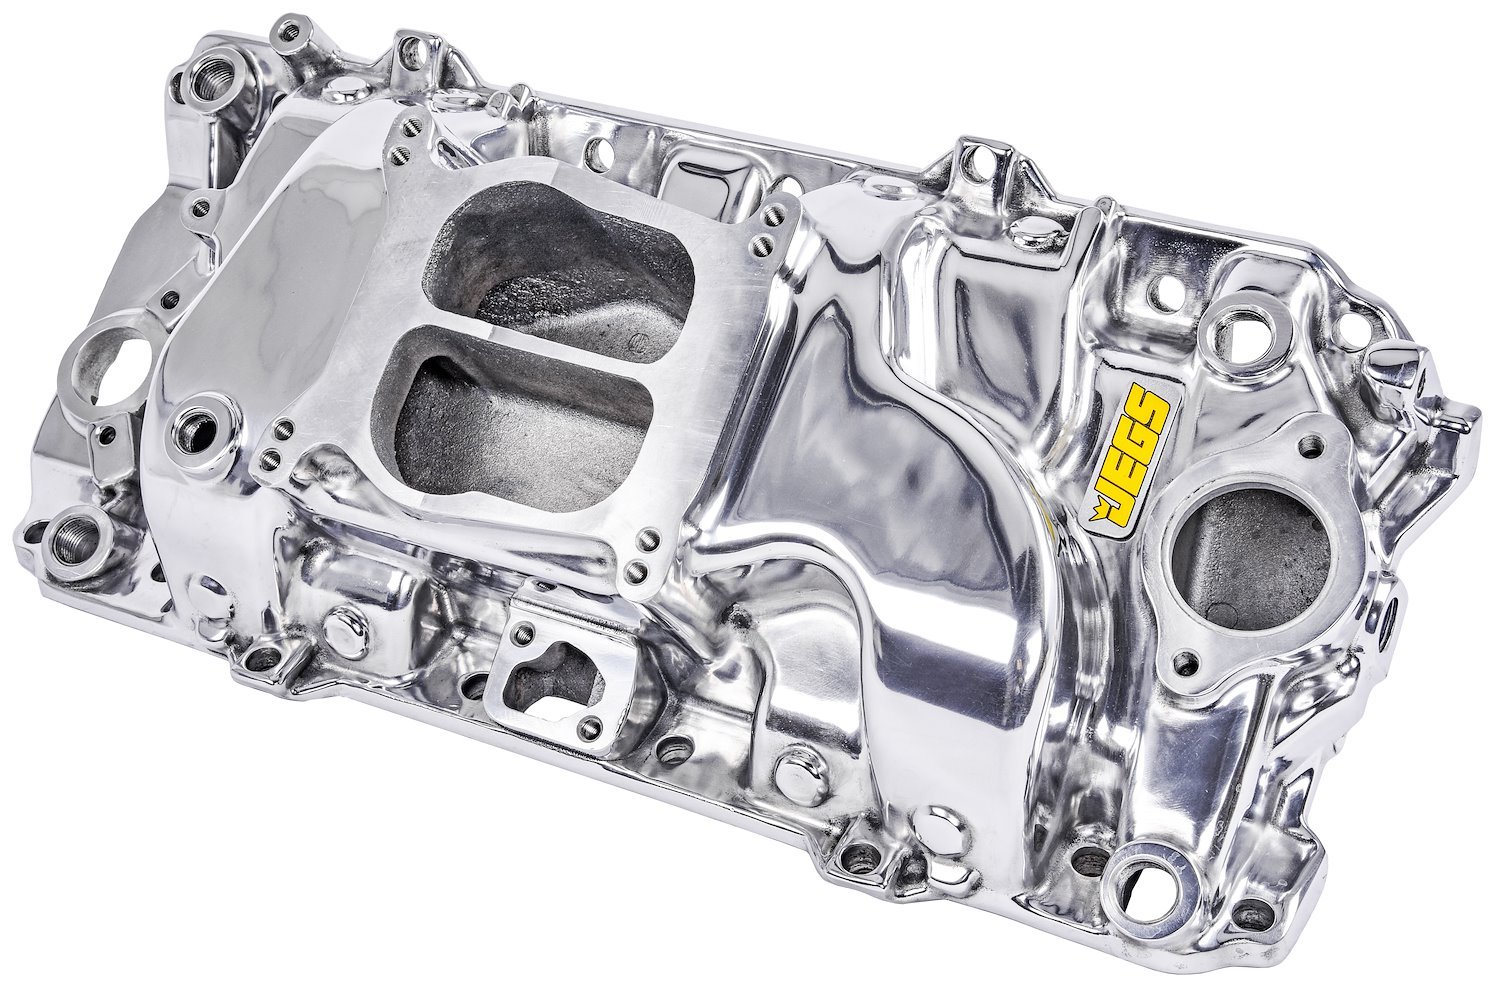 Intake Manifold for 396-502 Big Block Chevy, Dual Plane [Oval Port, Polished]